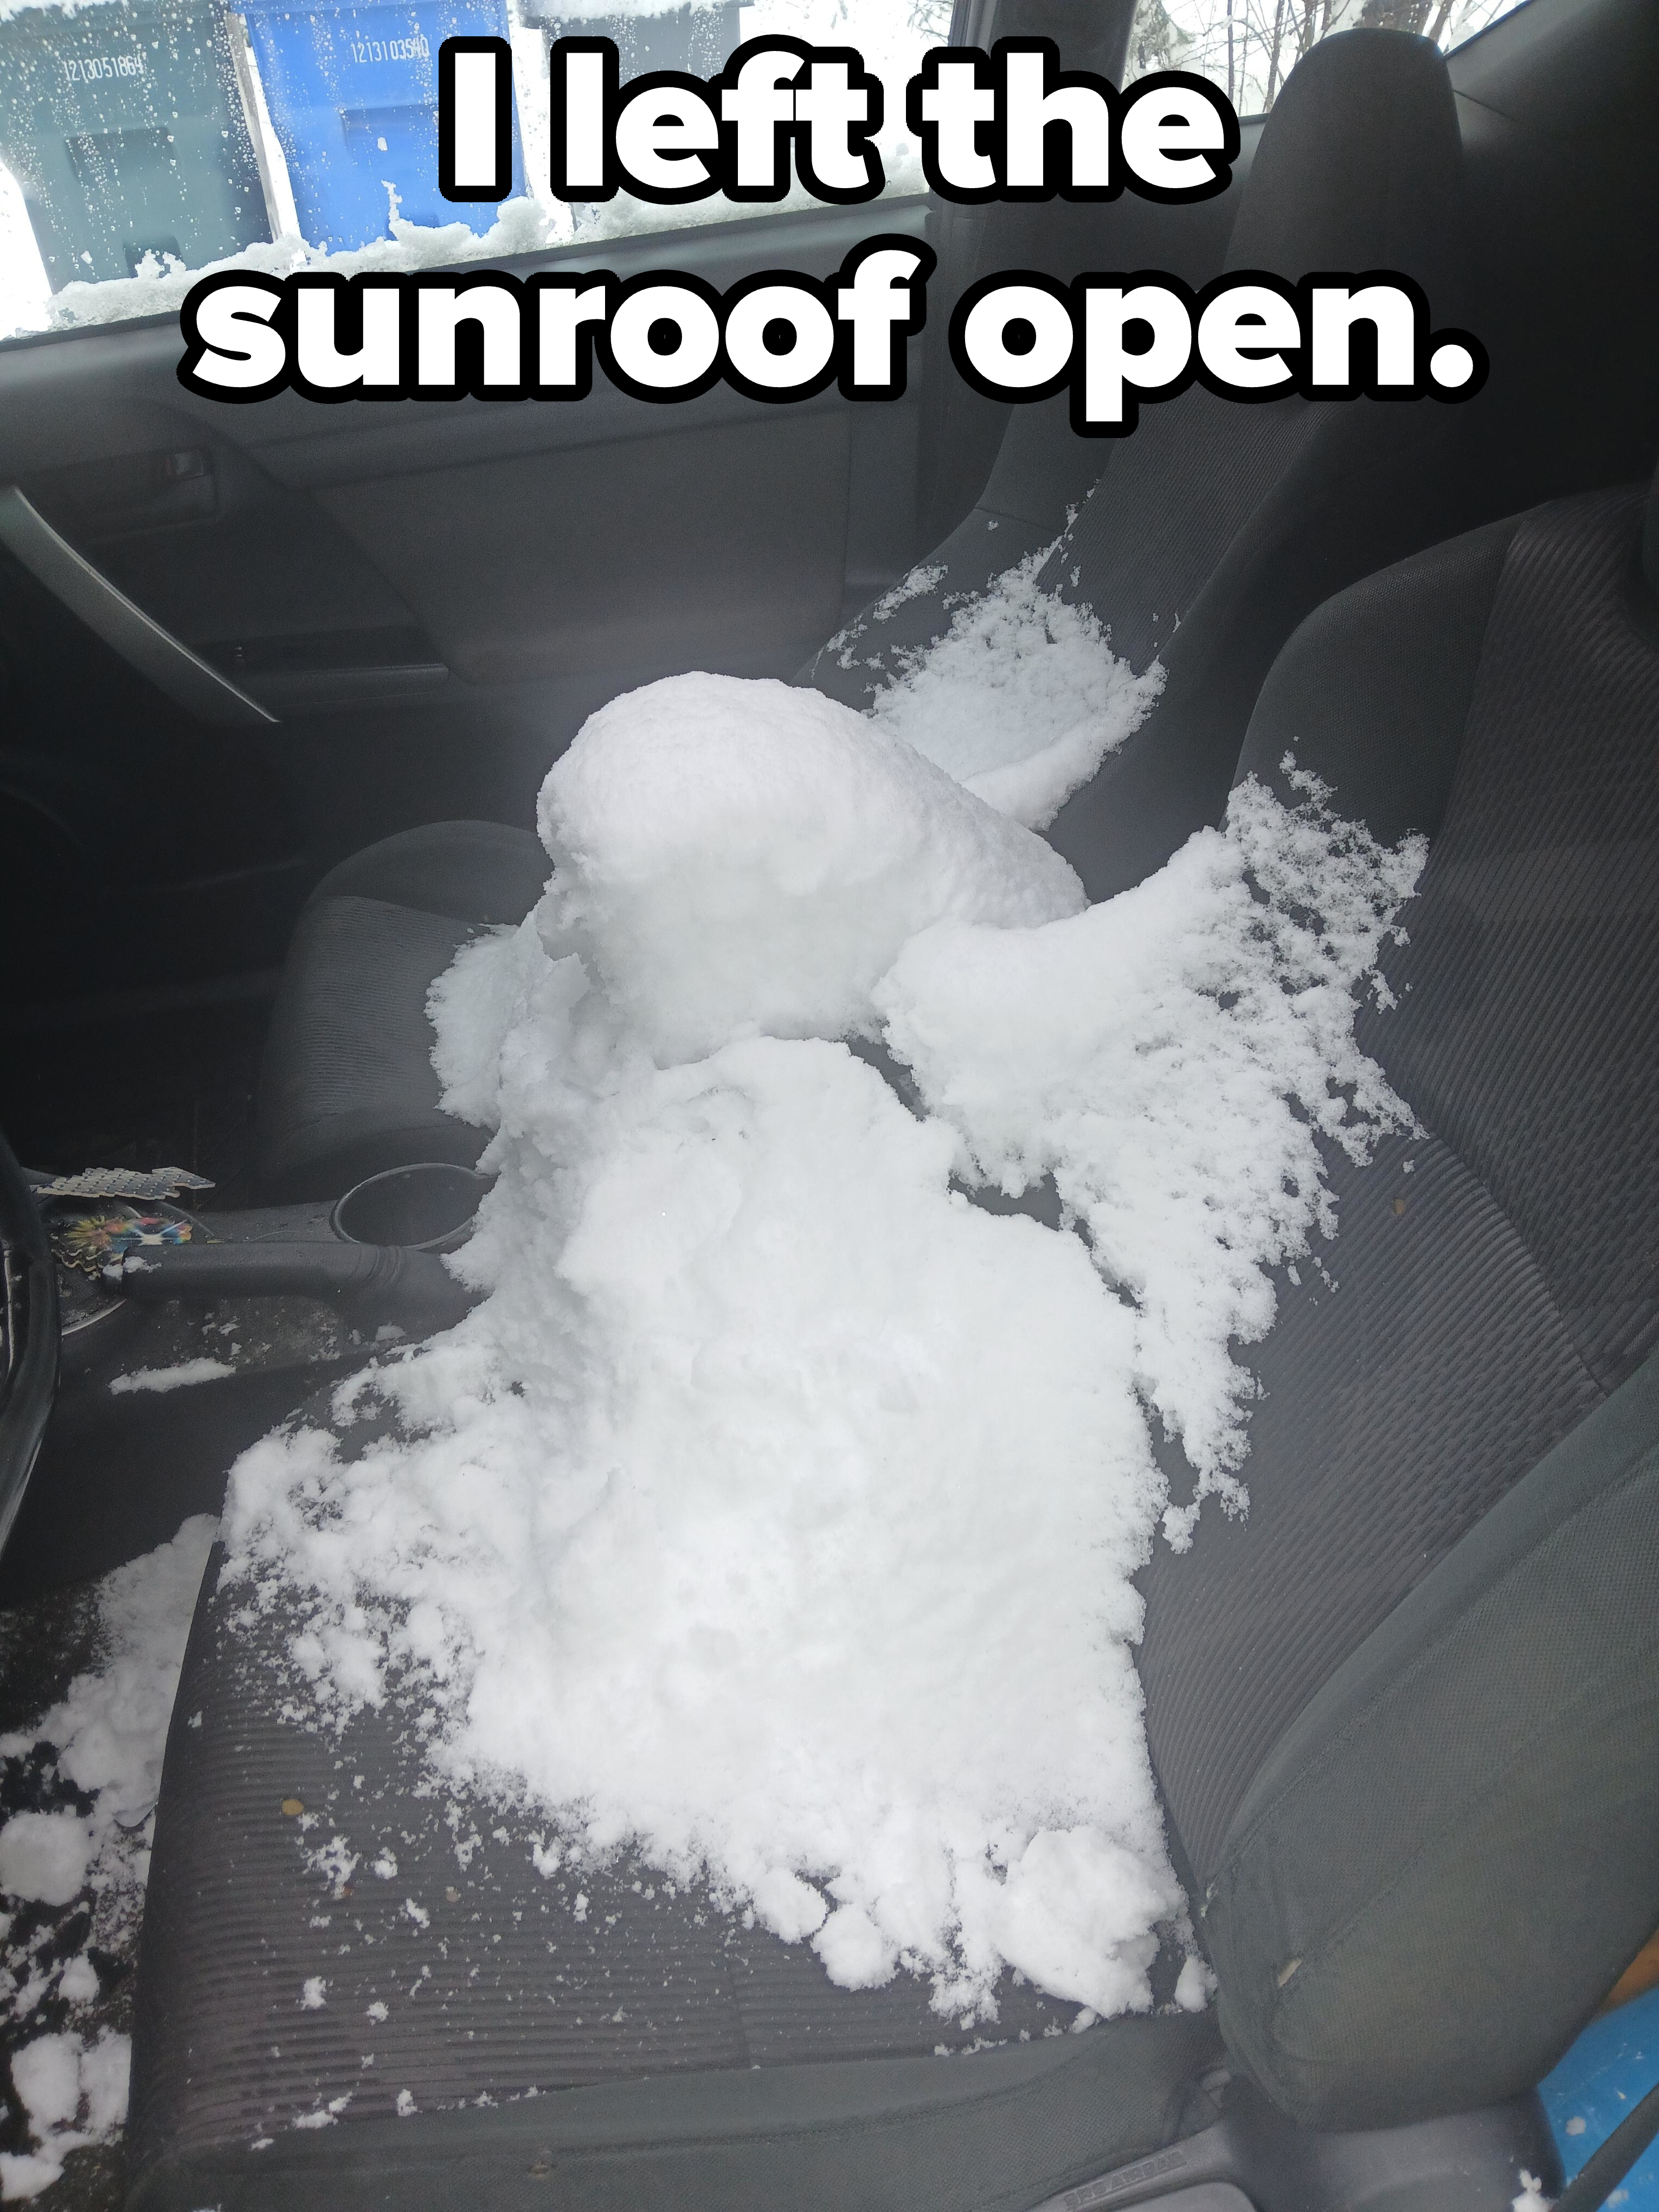 Heaped snow on a car&#x27;s passenger seat, with caption, &quot;I left the sunroof open&quot;